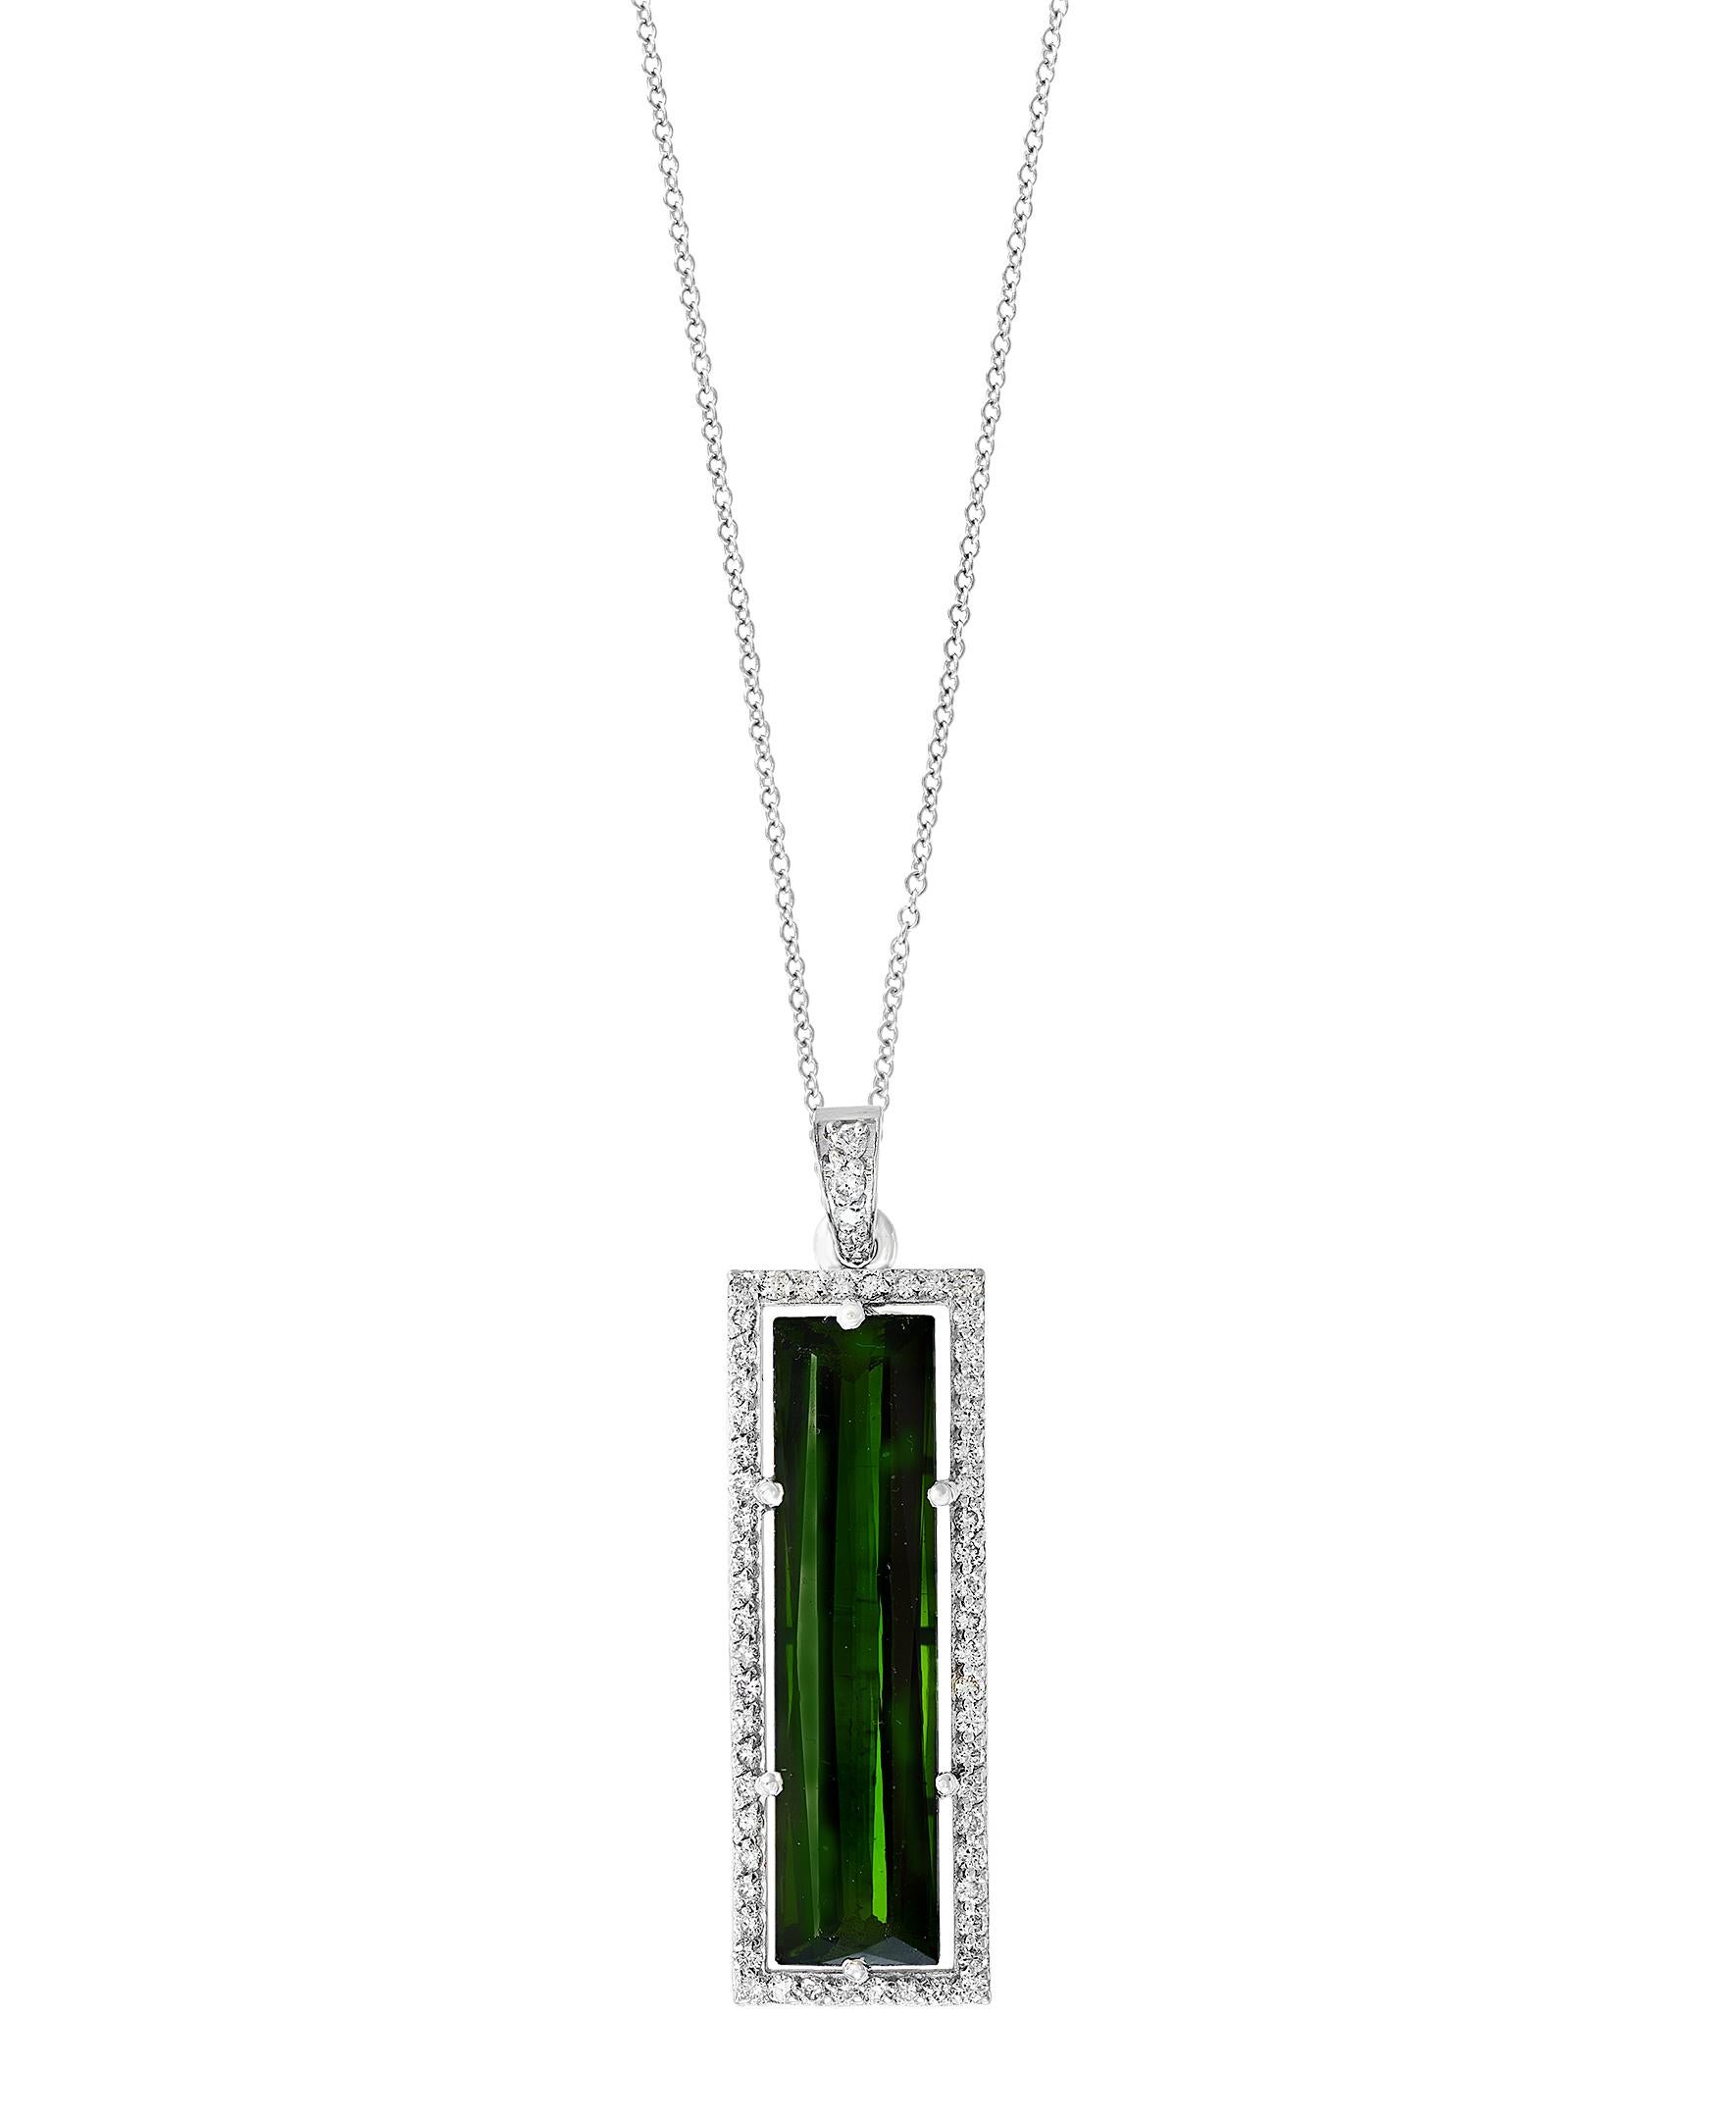   11.5  Carat Green Tourmaline  & Diamond Pendant /  Necklace 18 Karat  Gold.
This spectacular Pendant Necklace  consisting of a single long Cushion  Shape Green Tourmaline Approximately  11.5 Carat.  The  Green Tourmaline  is surrounded by